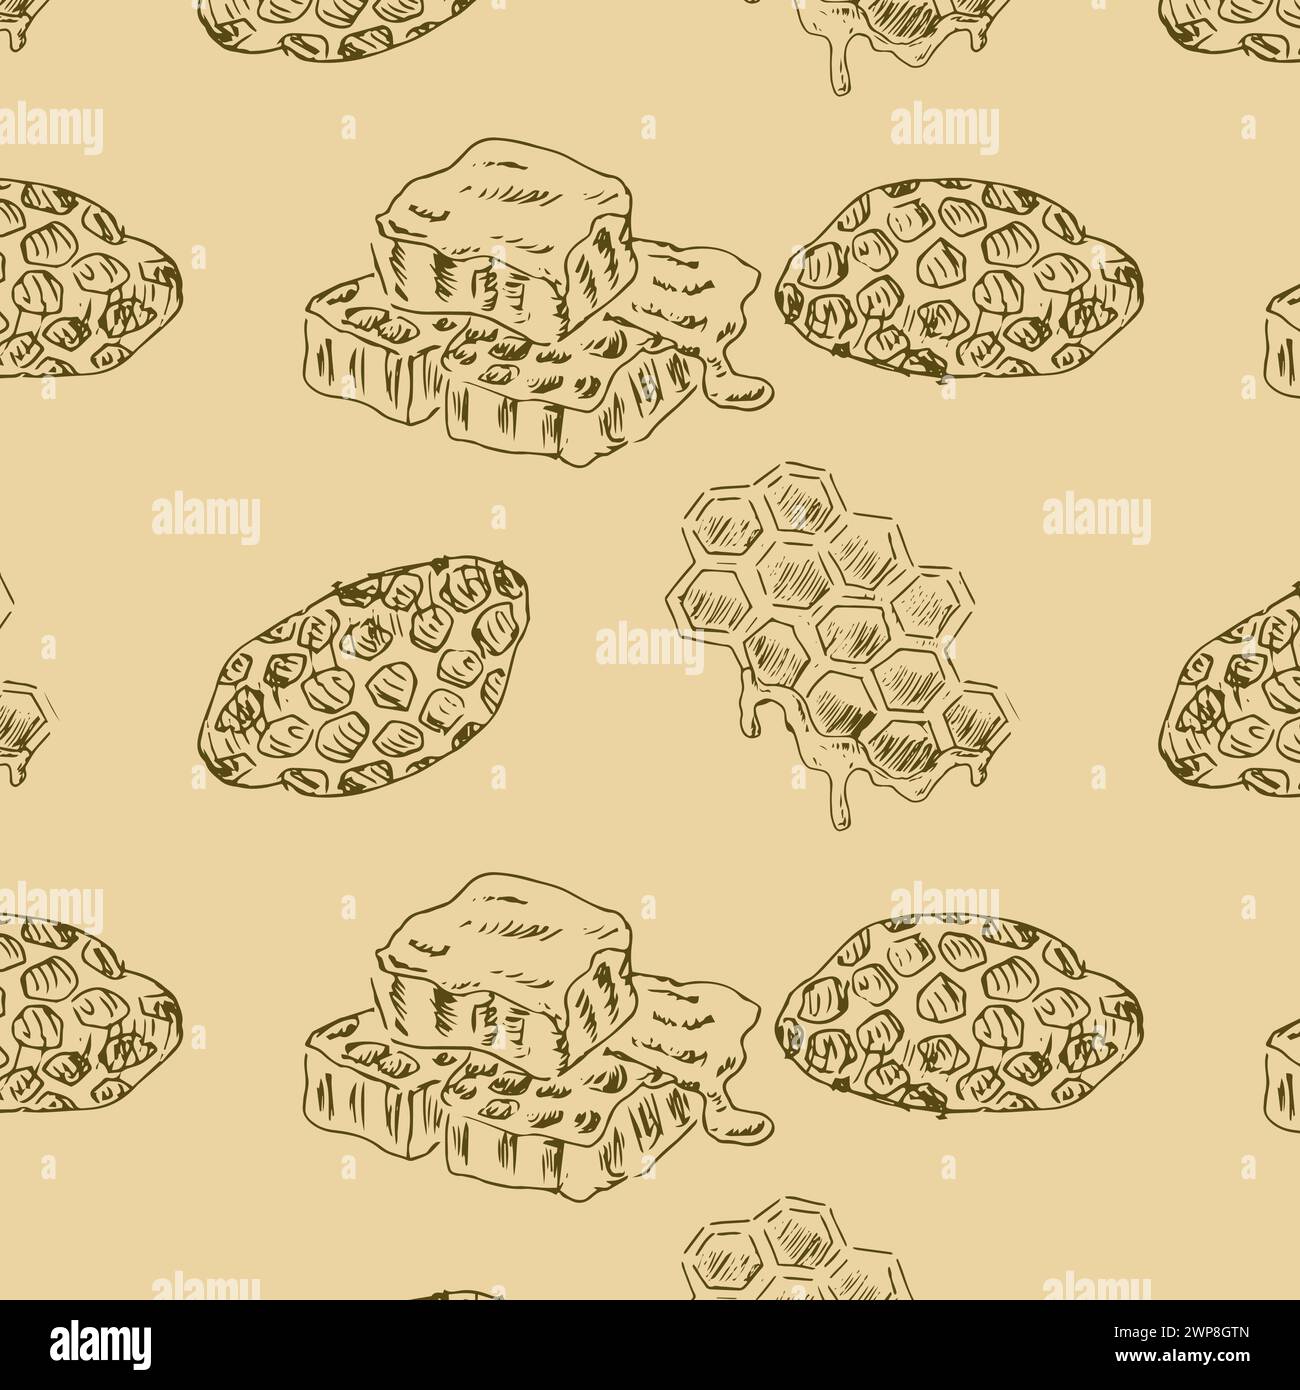 Hand drawn sketch of honeycomb elements patttern. Vector illustration can used for wrapping paper, textile, food label, print for organic honey produc Stock Vector